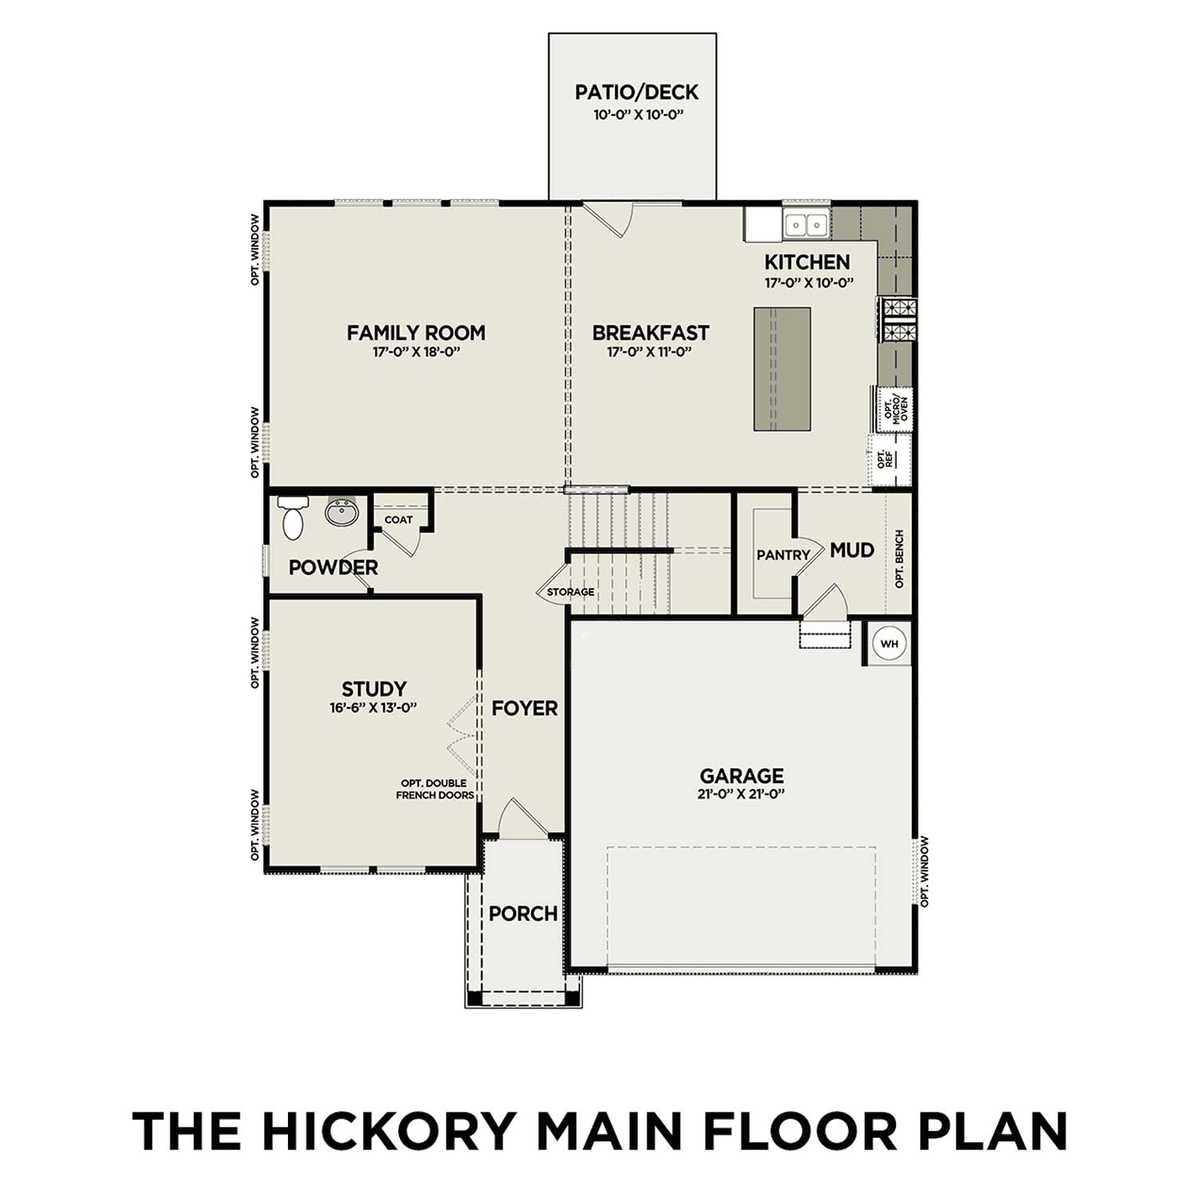 1 - The Hickory E floor plan layout for 3607 Barbee Ct in Davidson Homes' Salem Landing community.